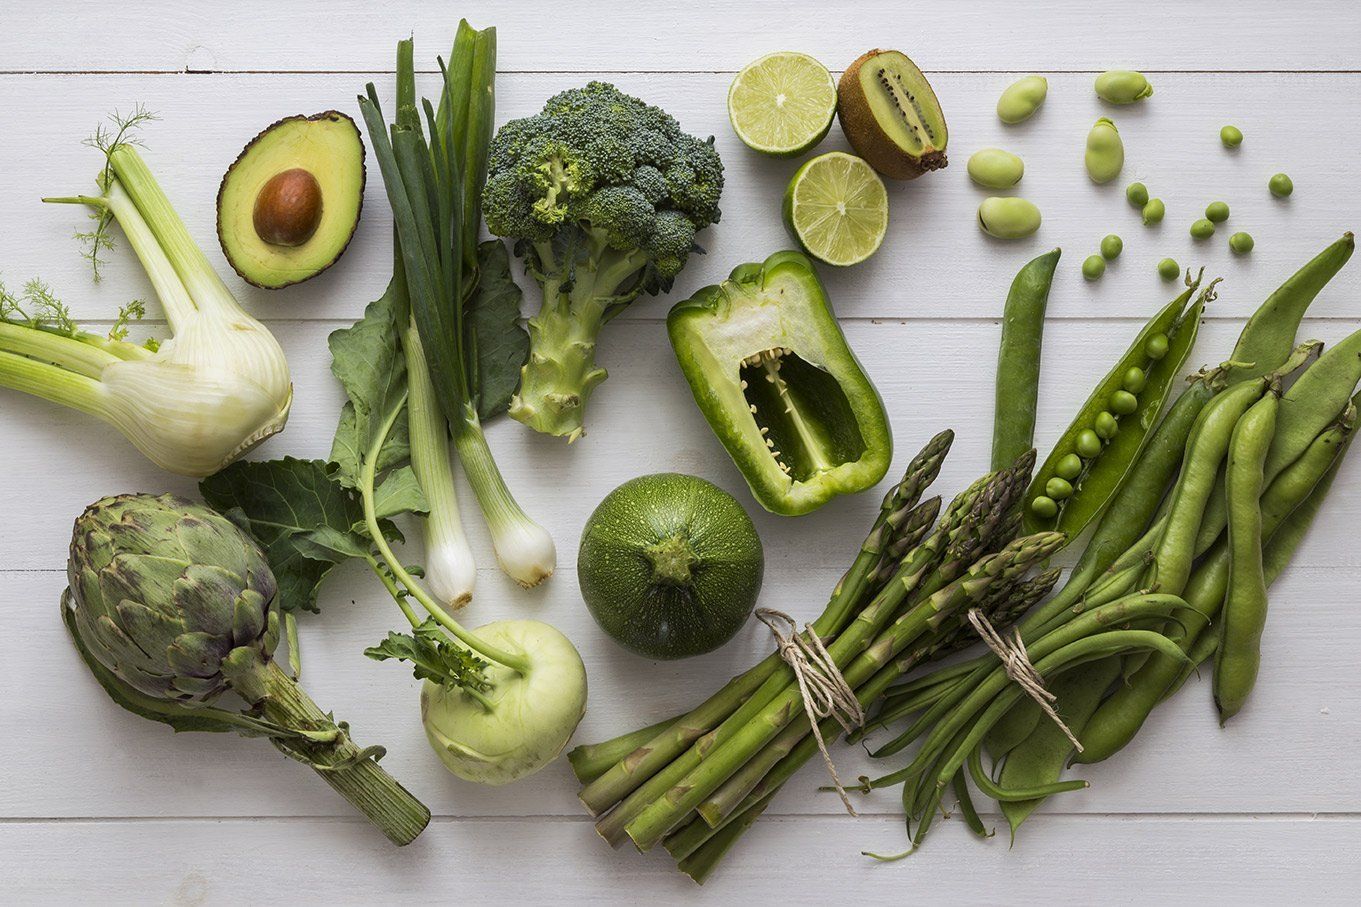 Green vegetables are perfect for a body and mind Detox